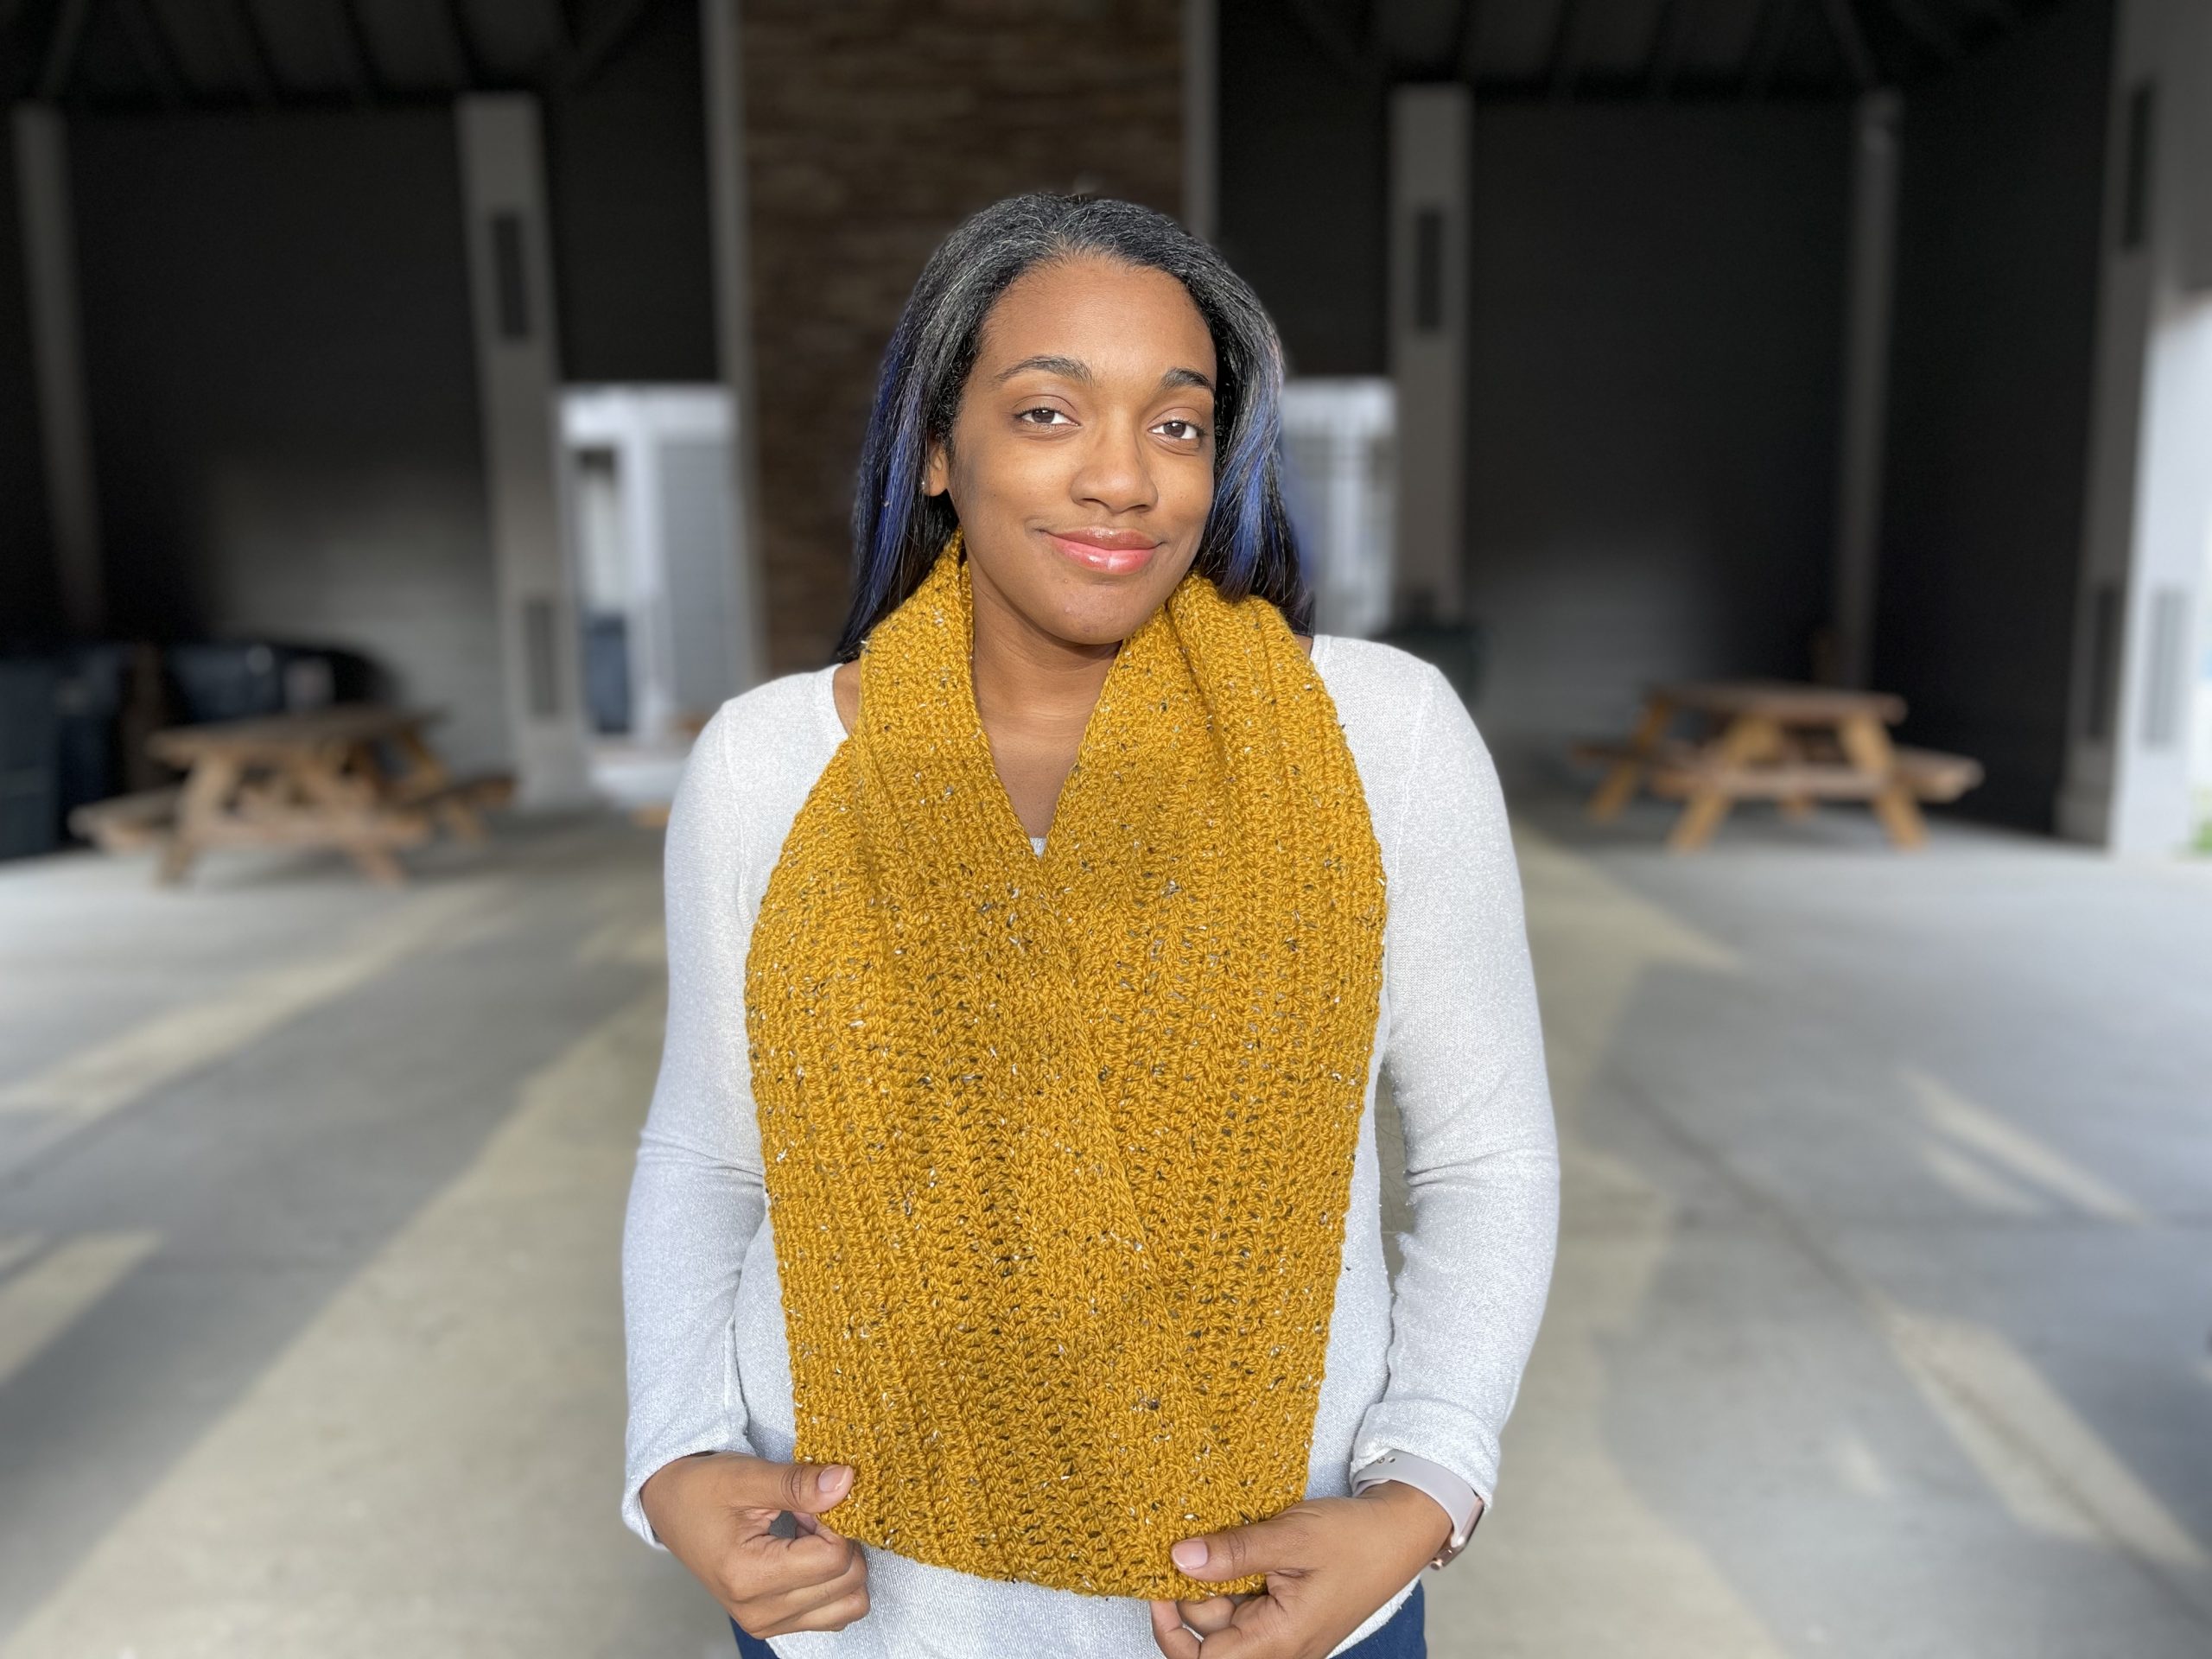 An image of an infinity crochet scarf made with a subtle texture in a mustard tweed color yarn. The woman is smiling while wearing this crochet scarf.